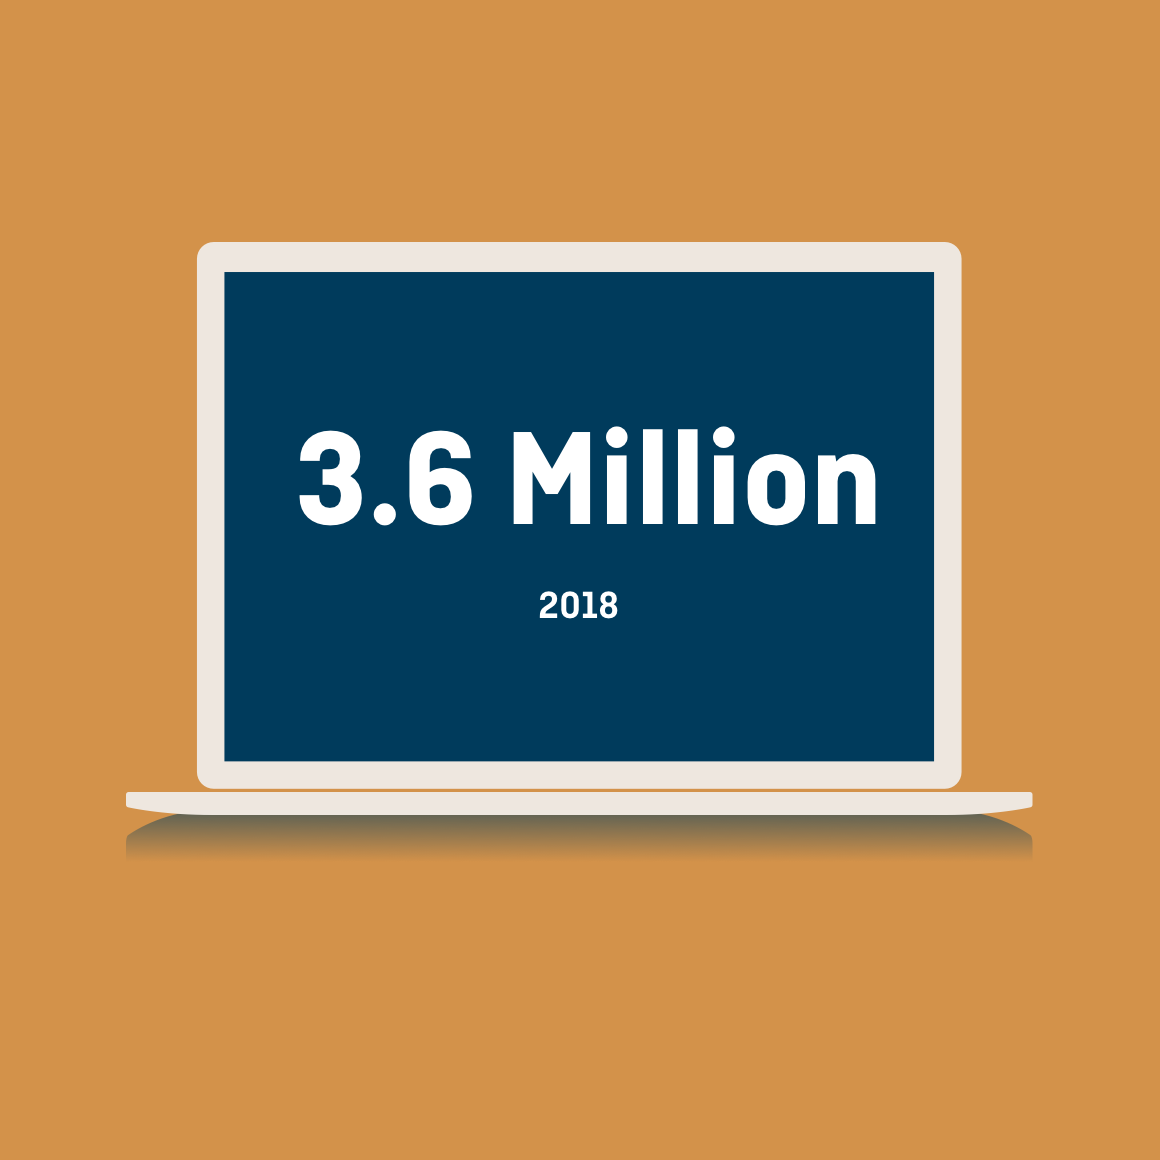 Graphic showing 3.6 million web visitors in 2018